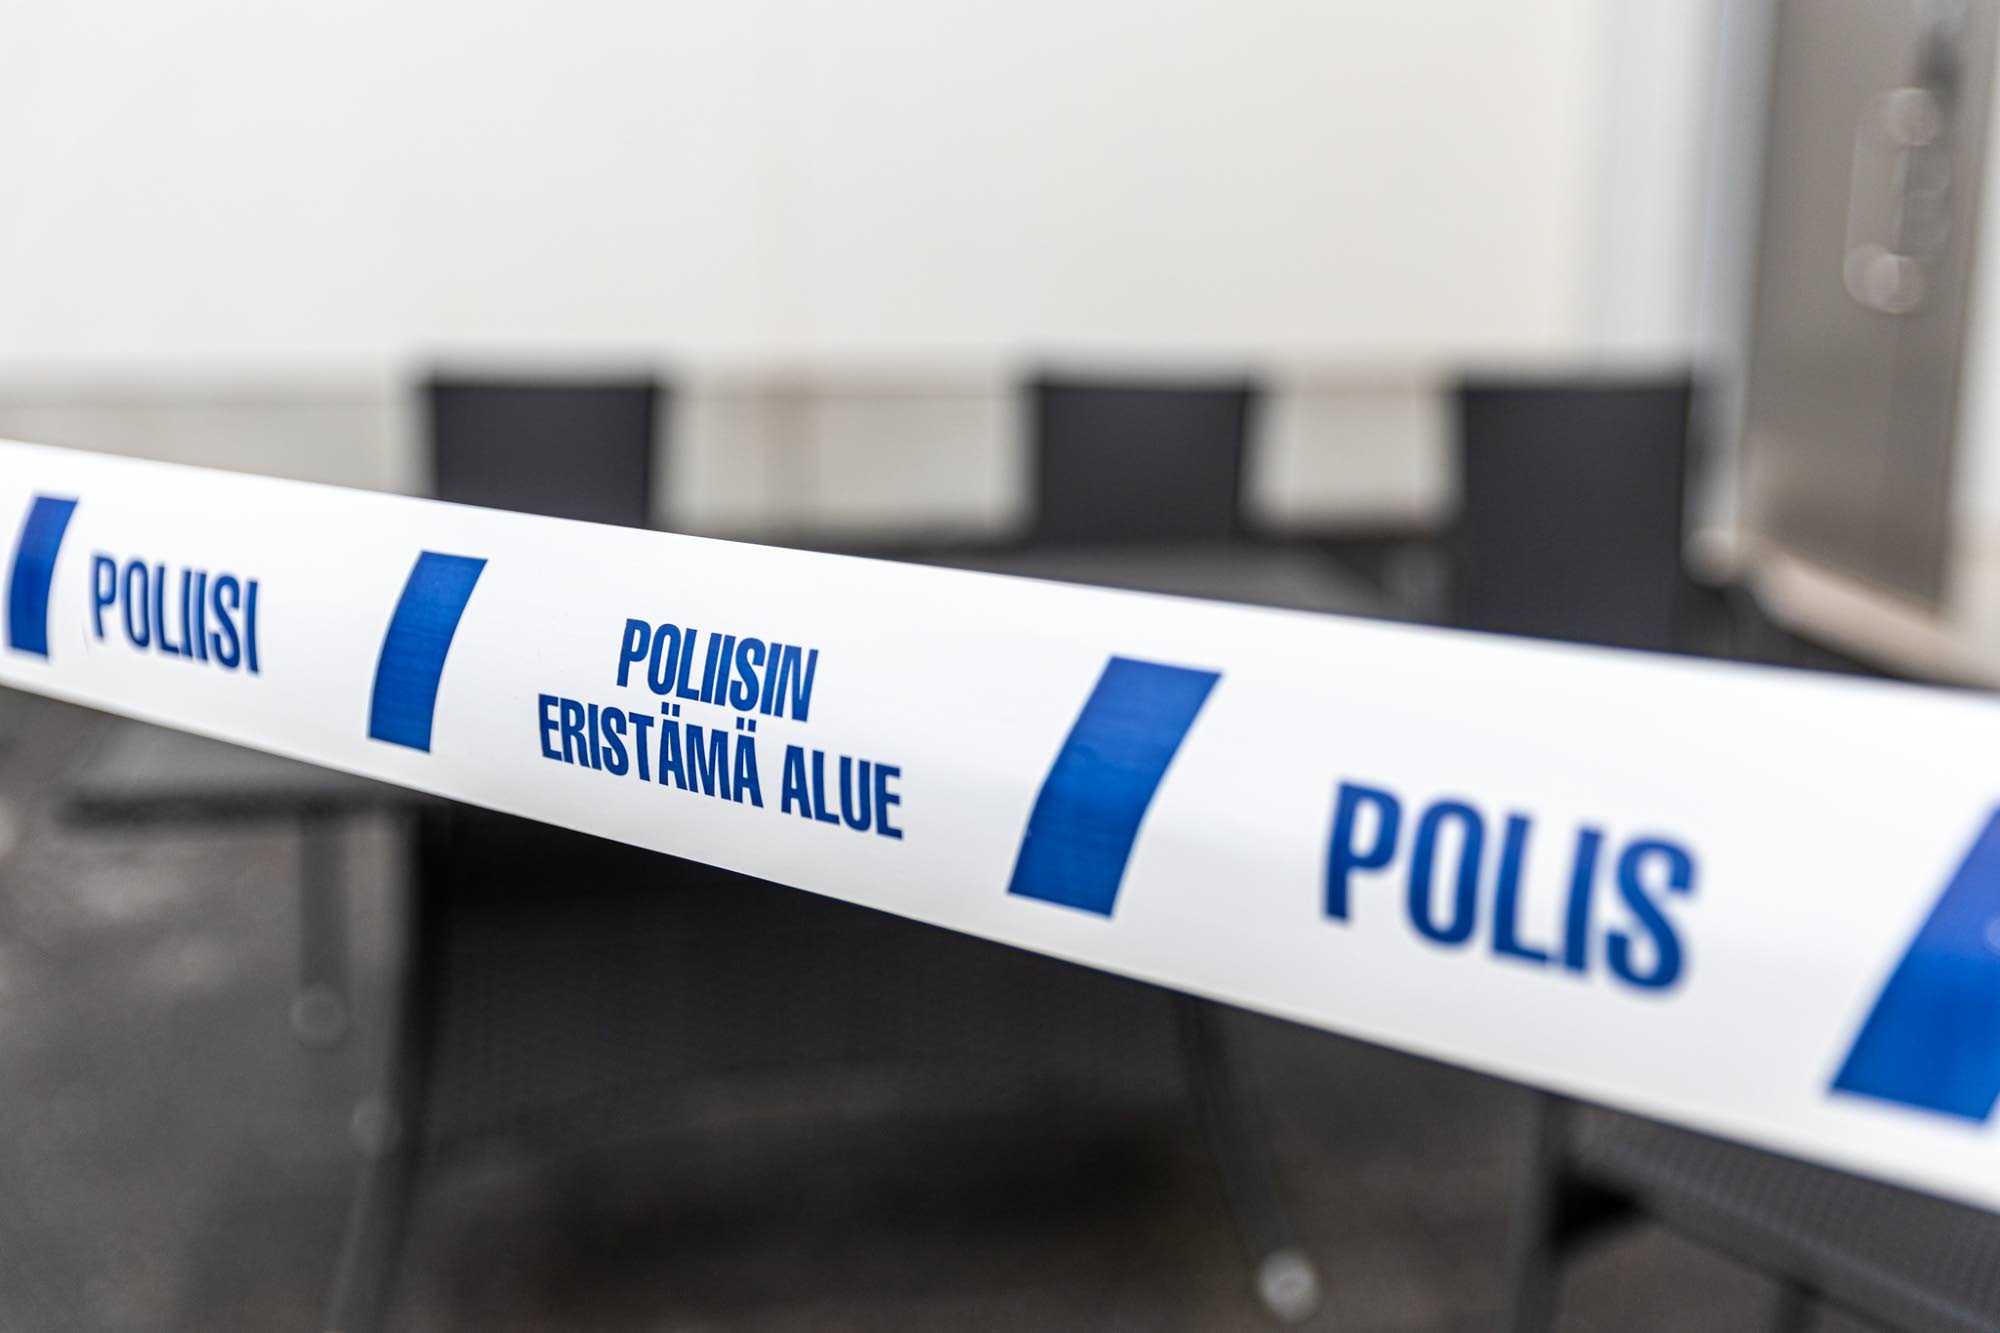 A blue and white ribbon with the words Poliisi, Poliisin eristämä alue (police cordoned off area) and Polis (Police).